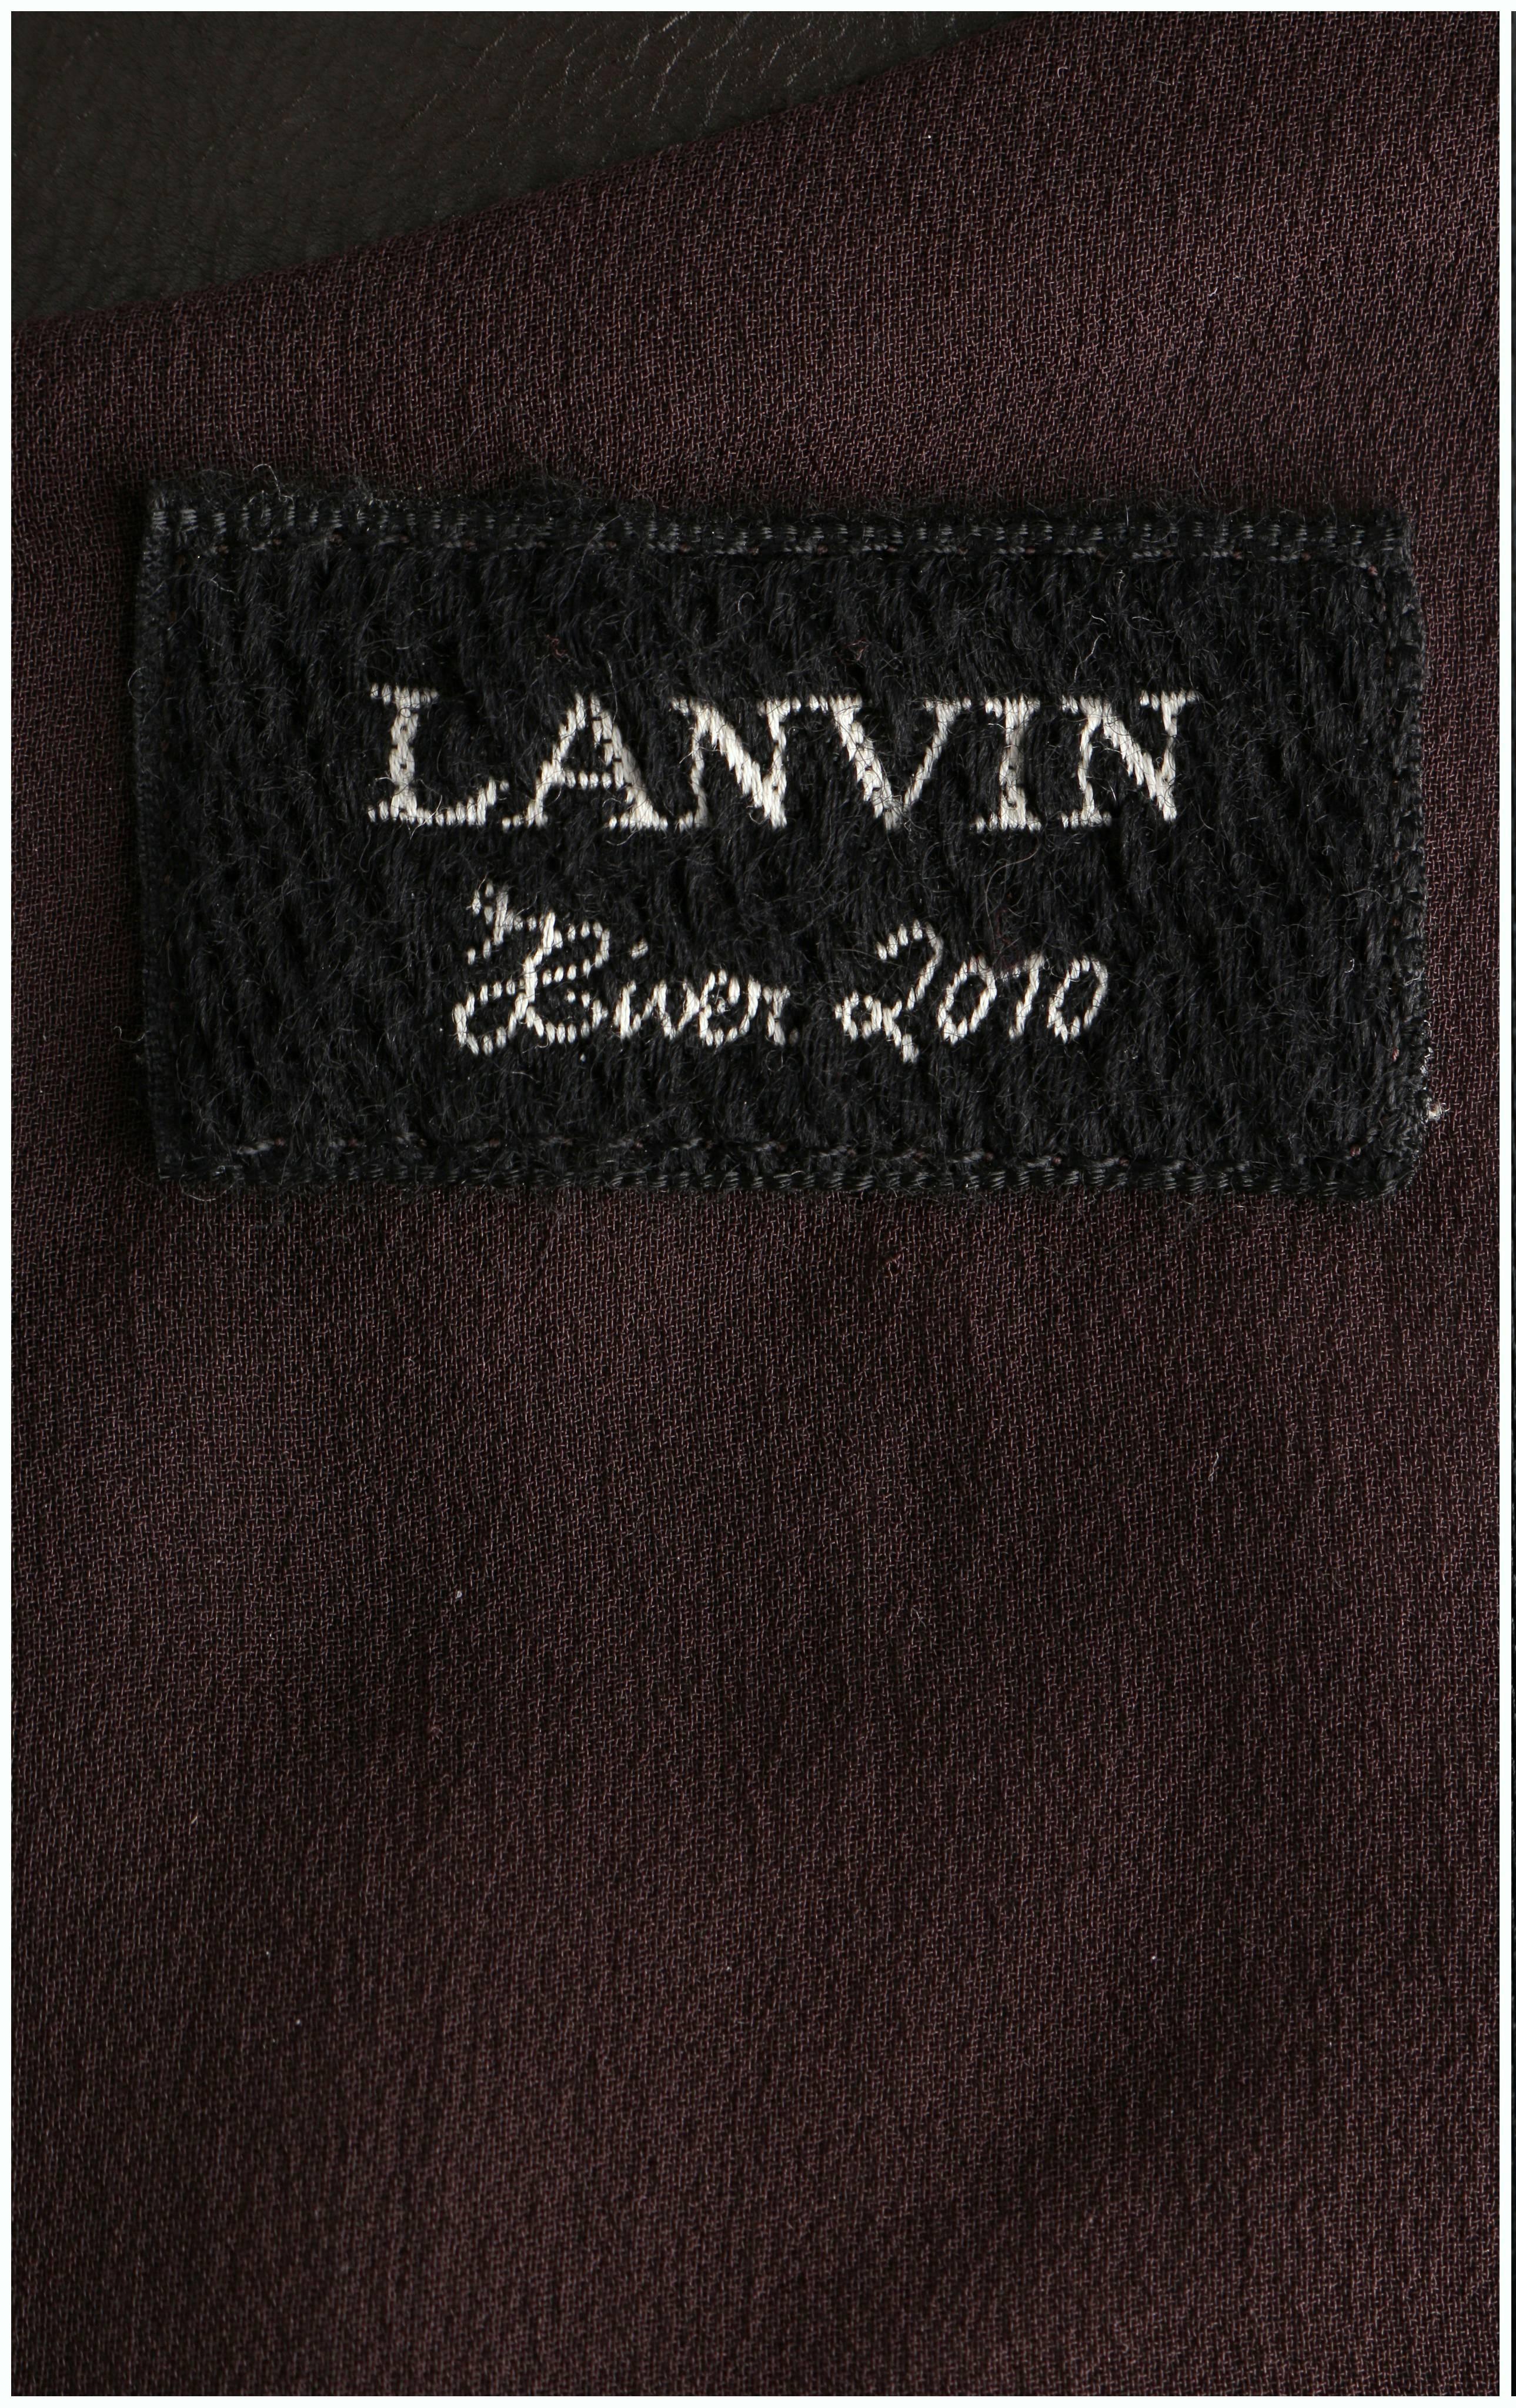 LANVIN F/W 2010 Runway Collection Dark Brown Calf Leather Shirt Structured Top 3